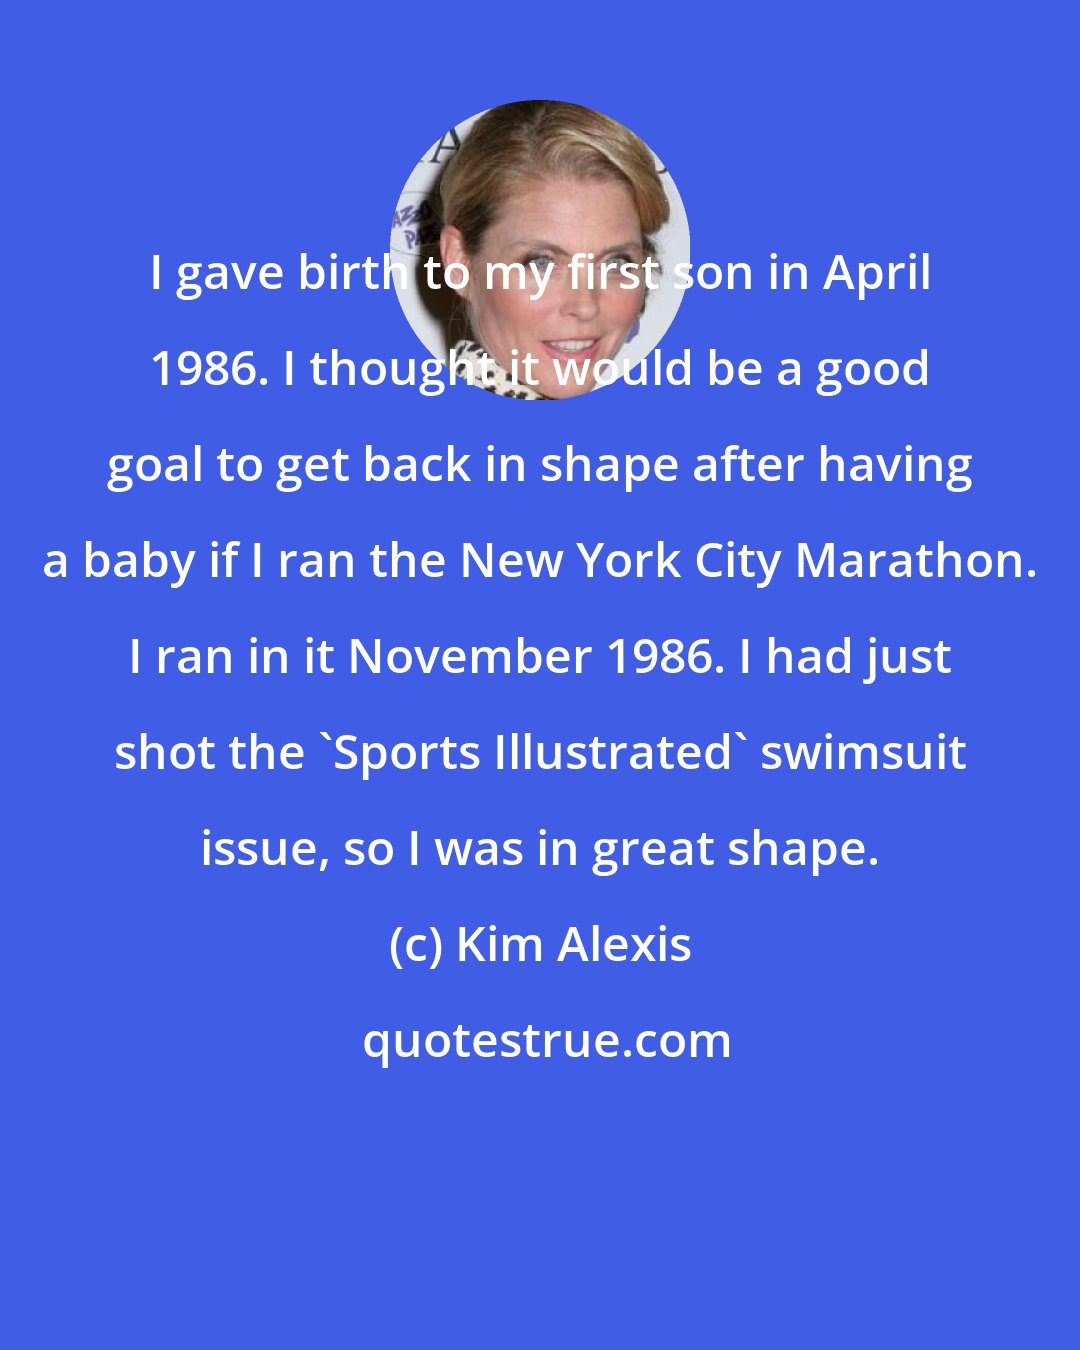 Kim Alexis: I gave birth to my first son in April 1986. I thought it would be a good goal to get back in shape after having a baby if I ran the New York City Marathon. I ran in it November 1986. I had just shot the 'Sports Illustrated' swimsuit issue, so I was in great shape.